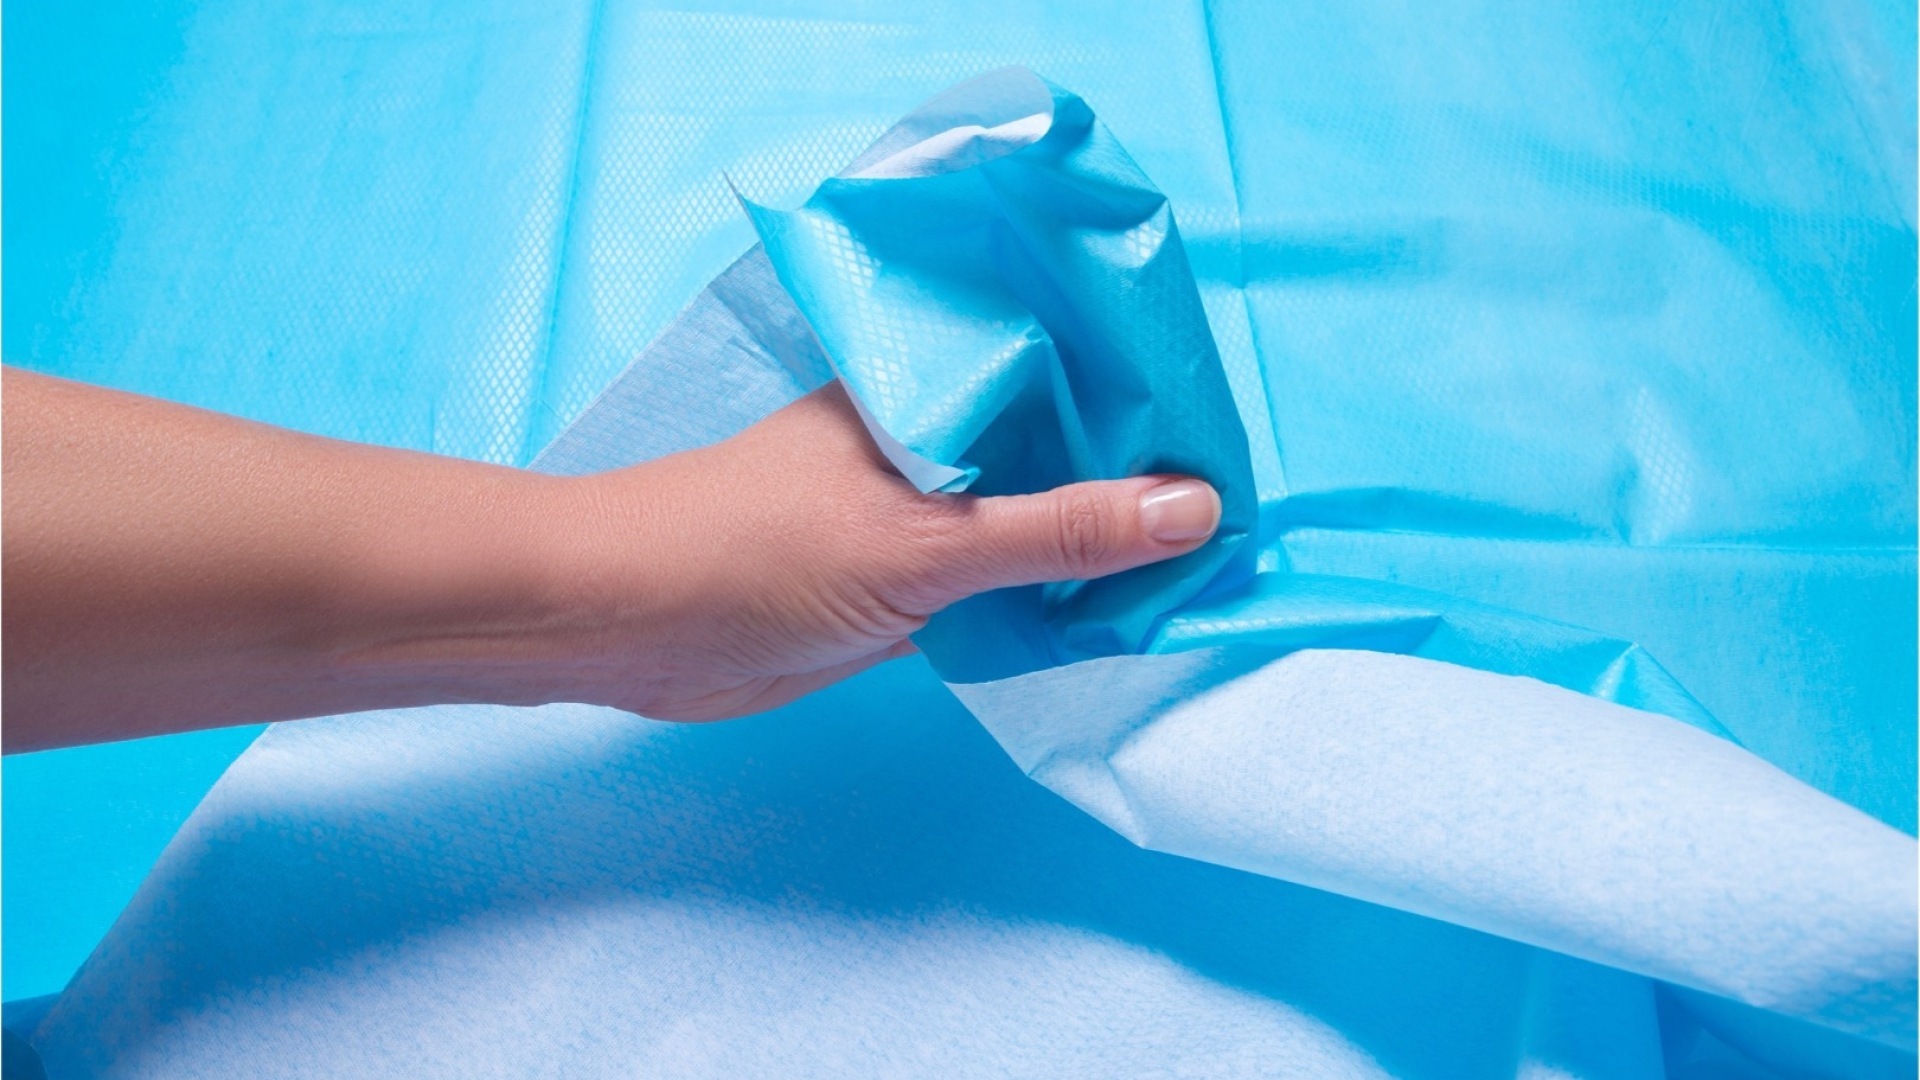 Medical Fabrics for Incontinence Care